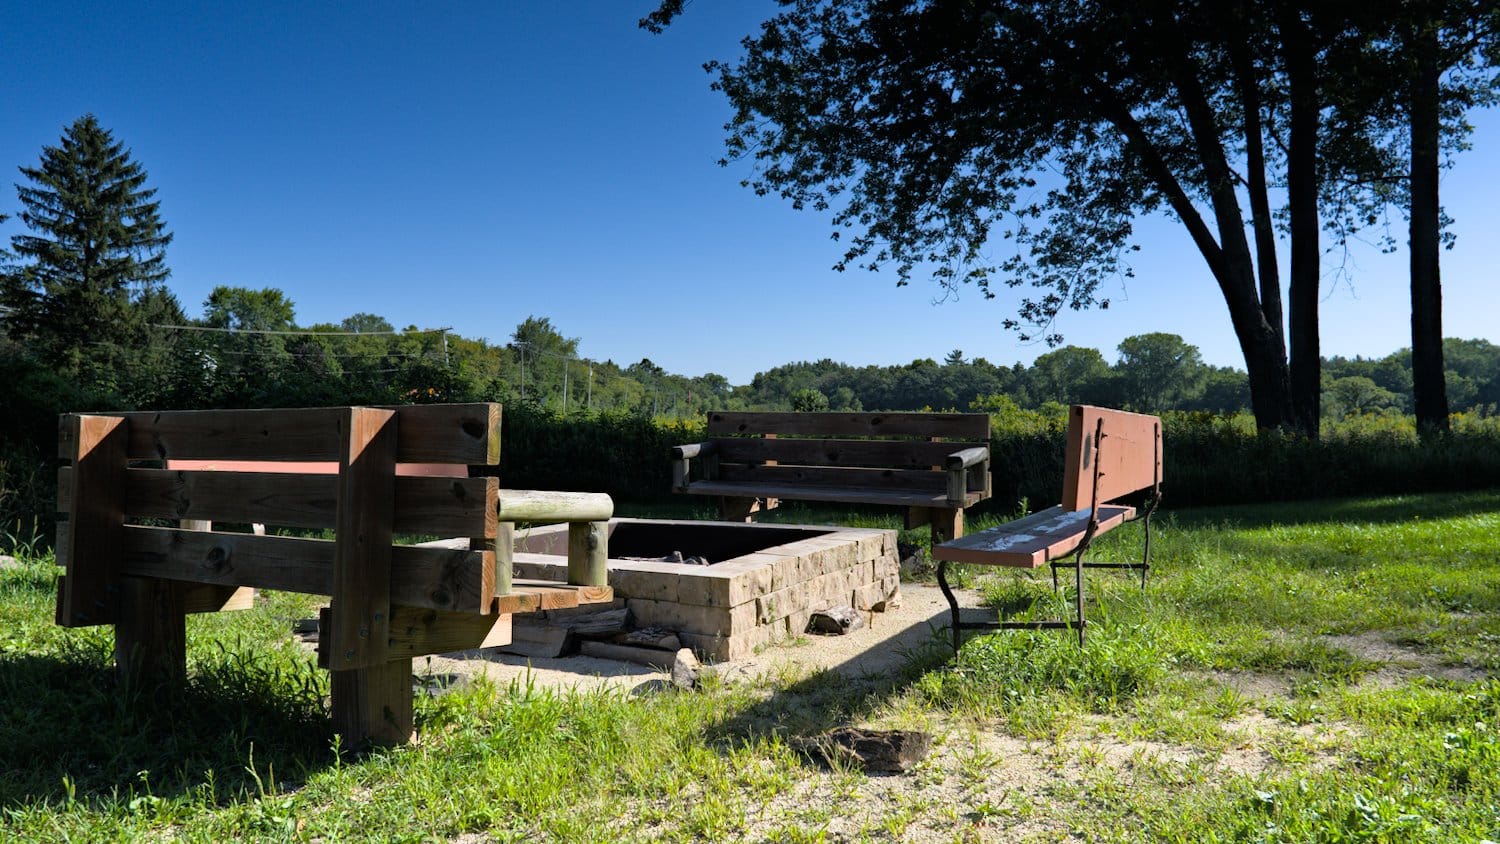 Benches and fire pit near the shelter at Sterne's Woods & Fen.